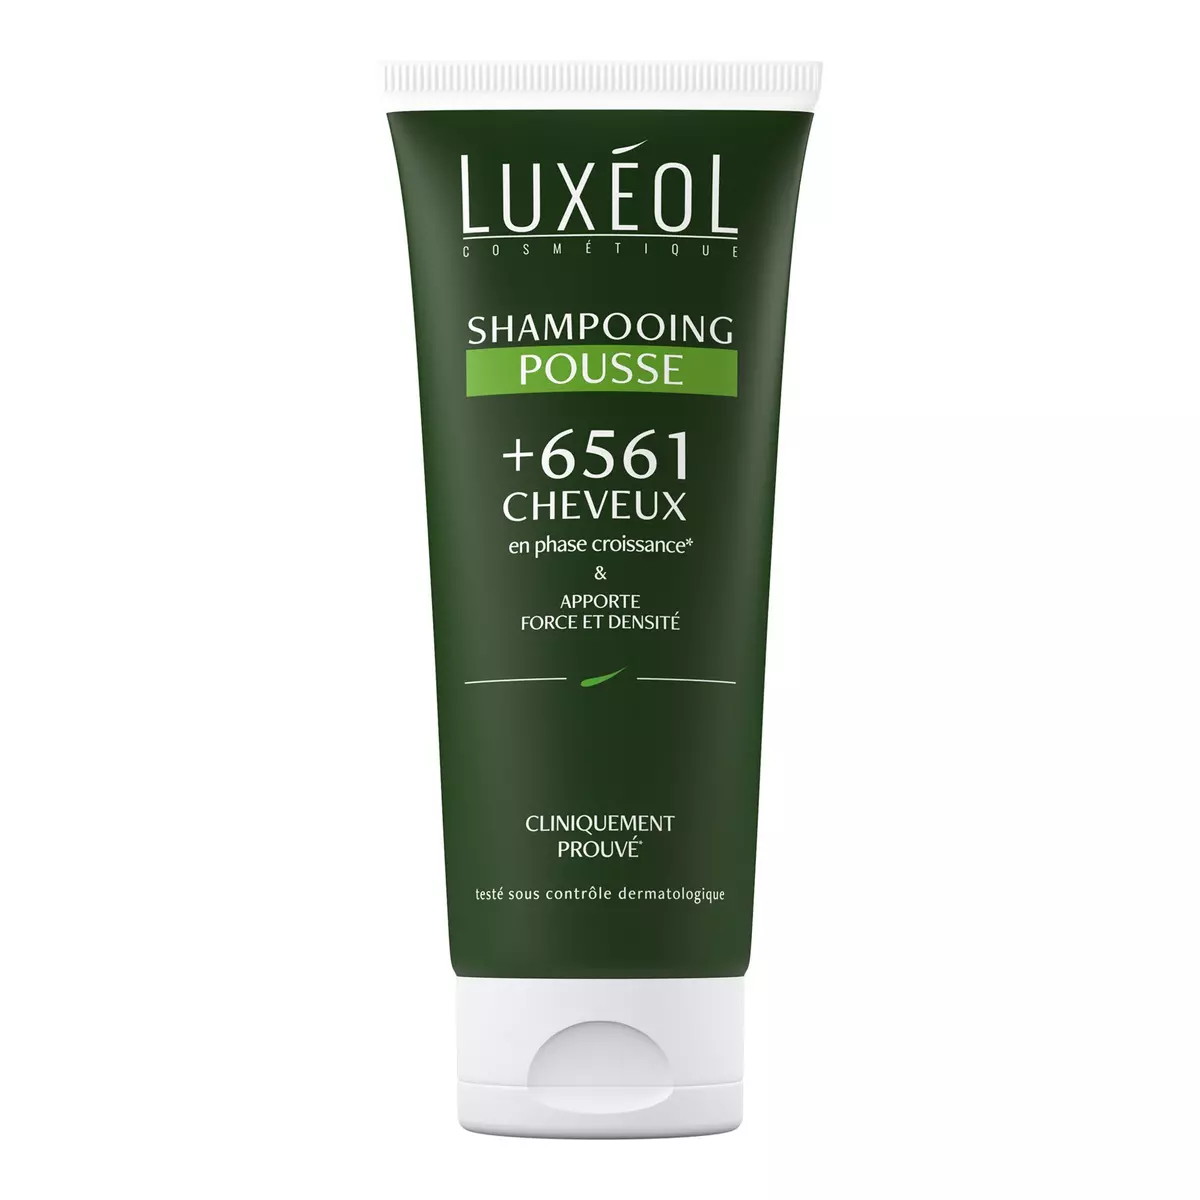 LUXÉOL Shampooing pousse 200ml